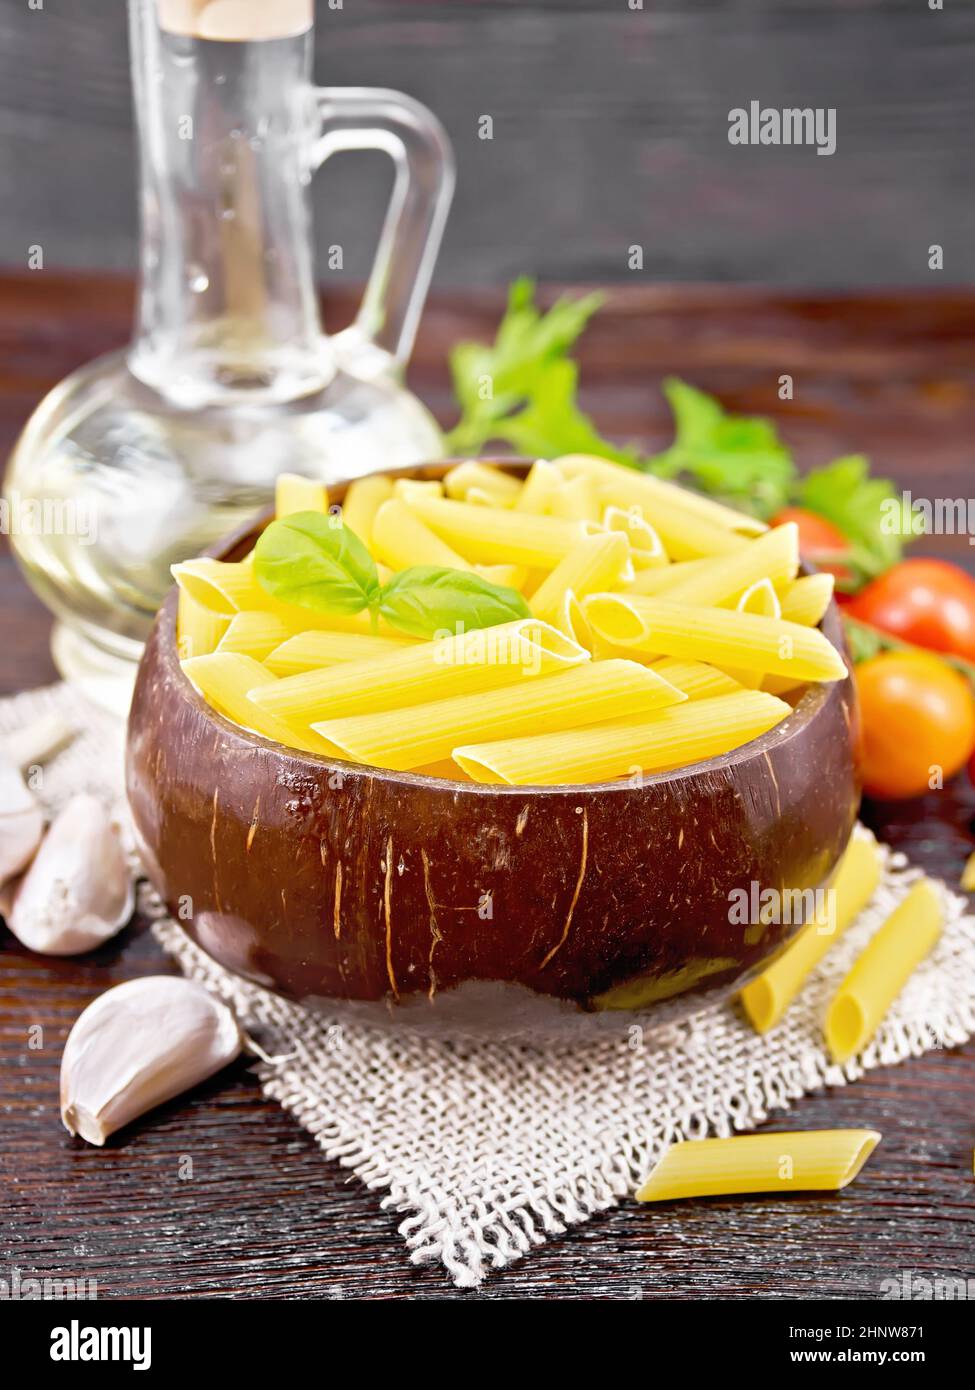 Wheat flour penne pasta in a bowl of coconut shells on sacking, tomatoes, garlic, vegetable oil in a decanter and parsley on wooden board background Stock Photo